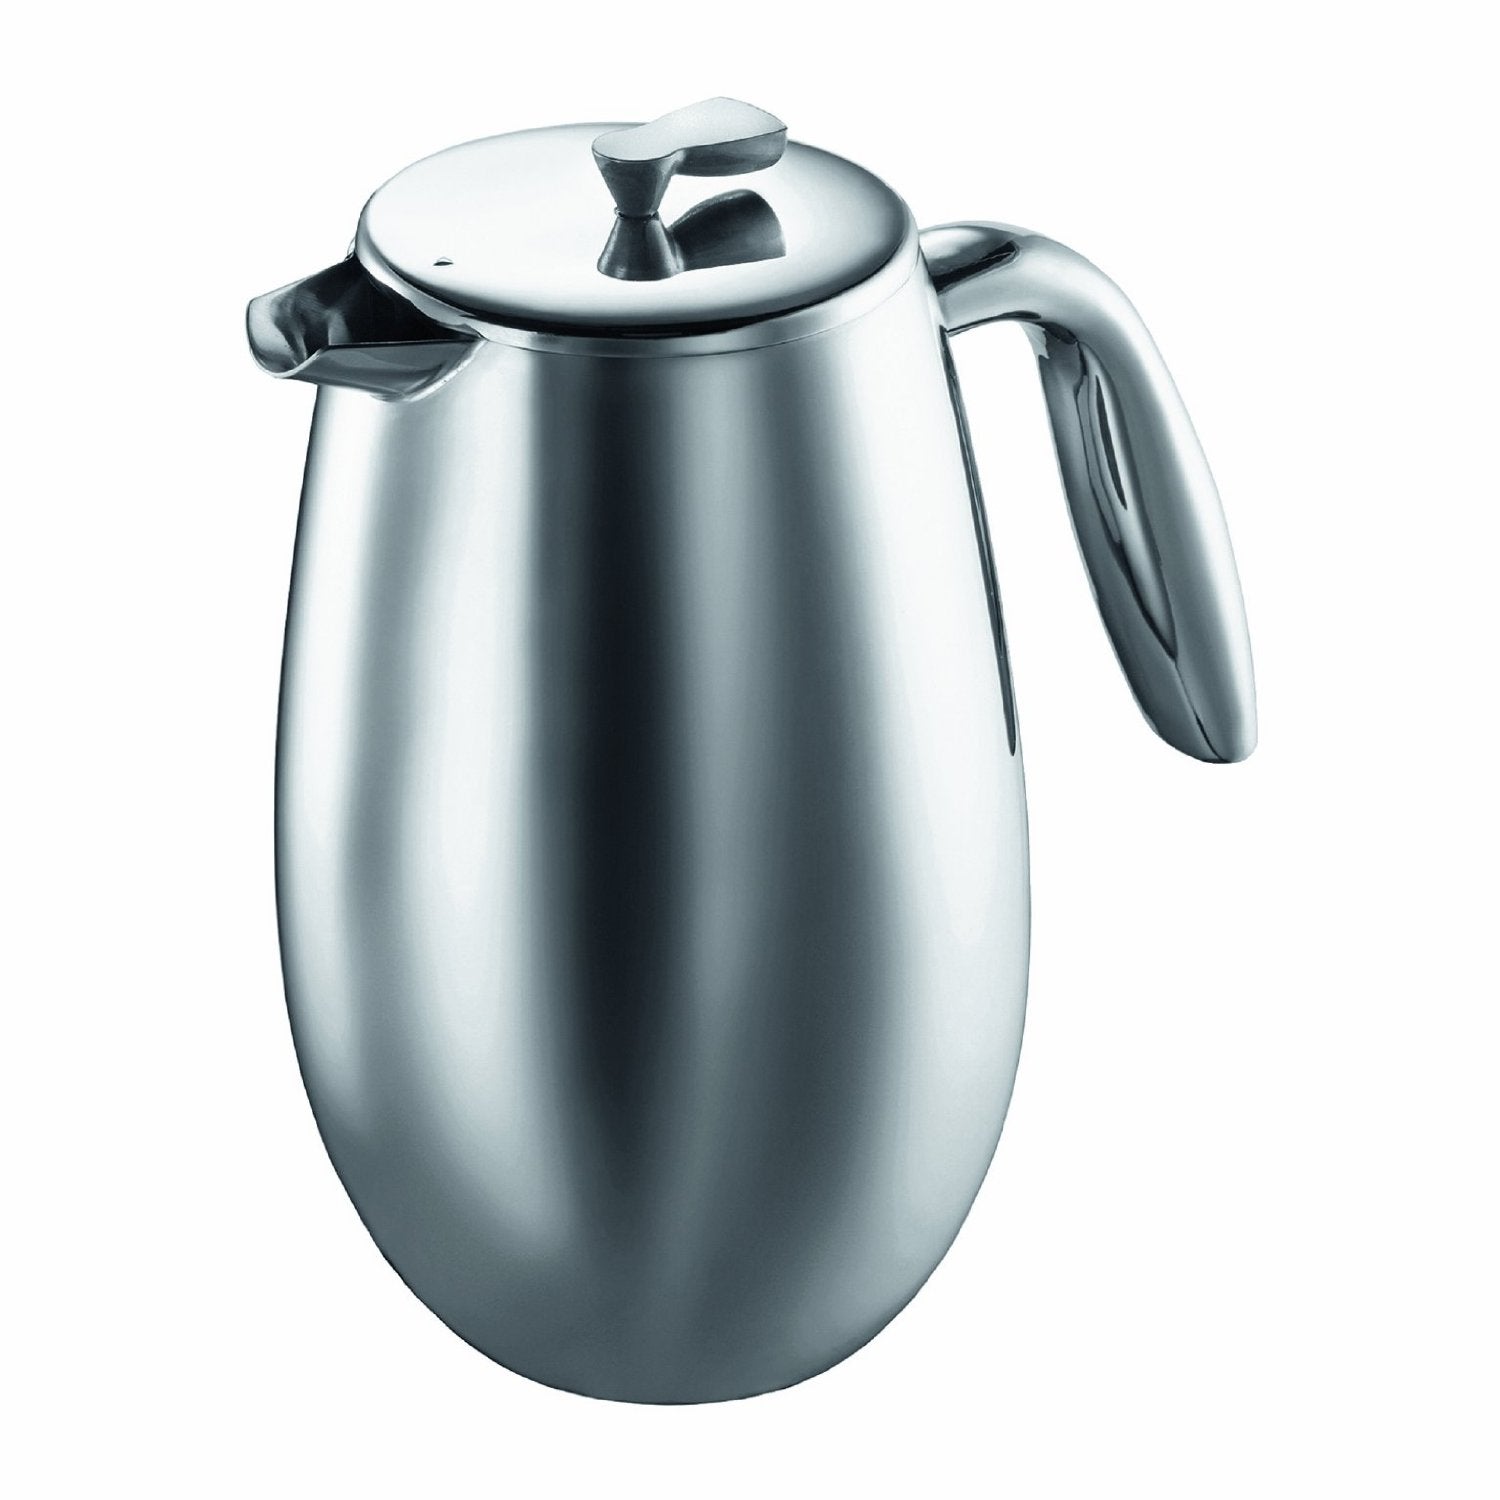 Bodum COLUMBIA Thermal French Press Coffee Maker, Stainless Steel (34 Ounces) - Nomad Coffee Club